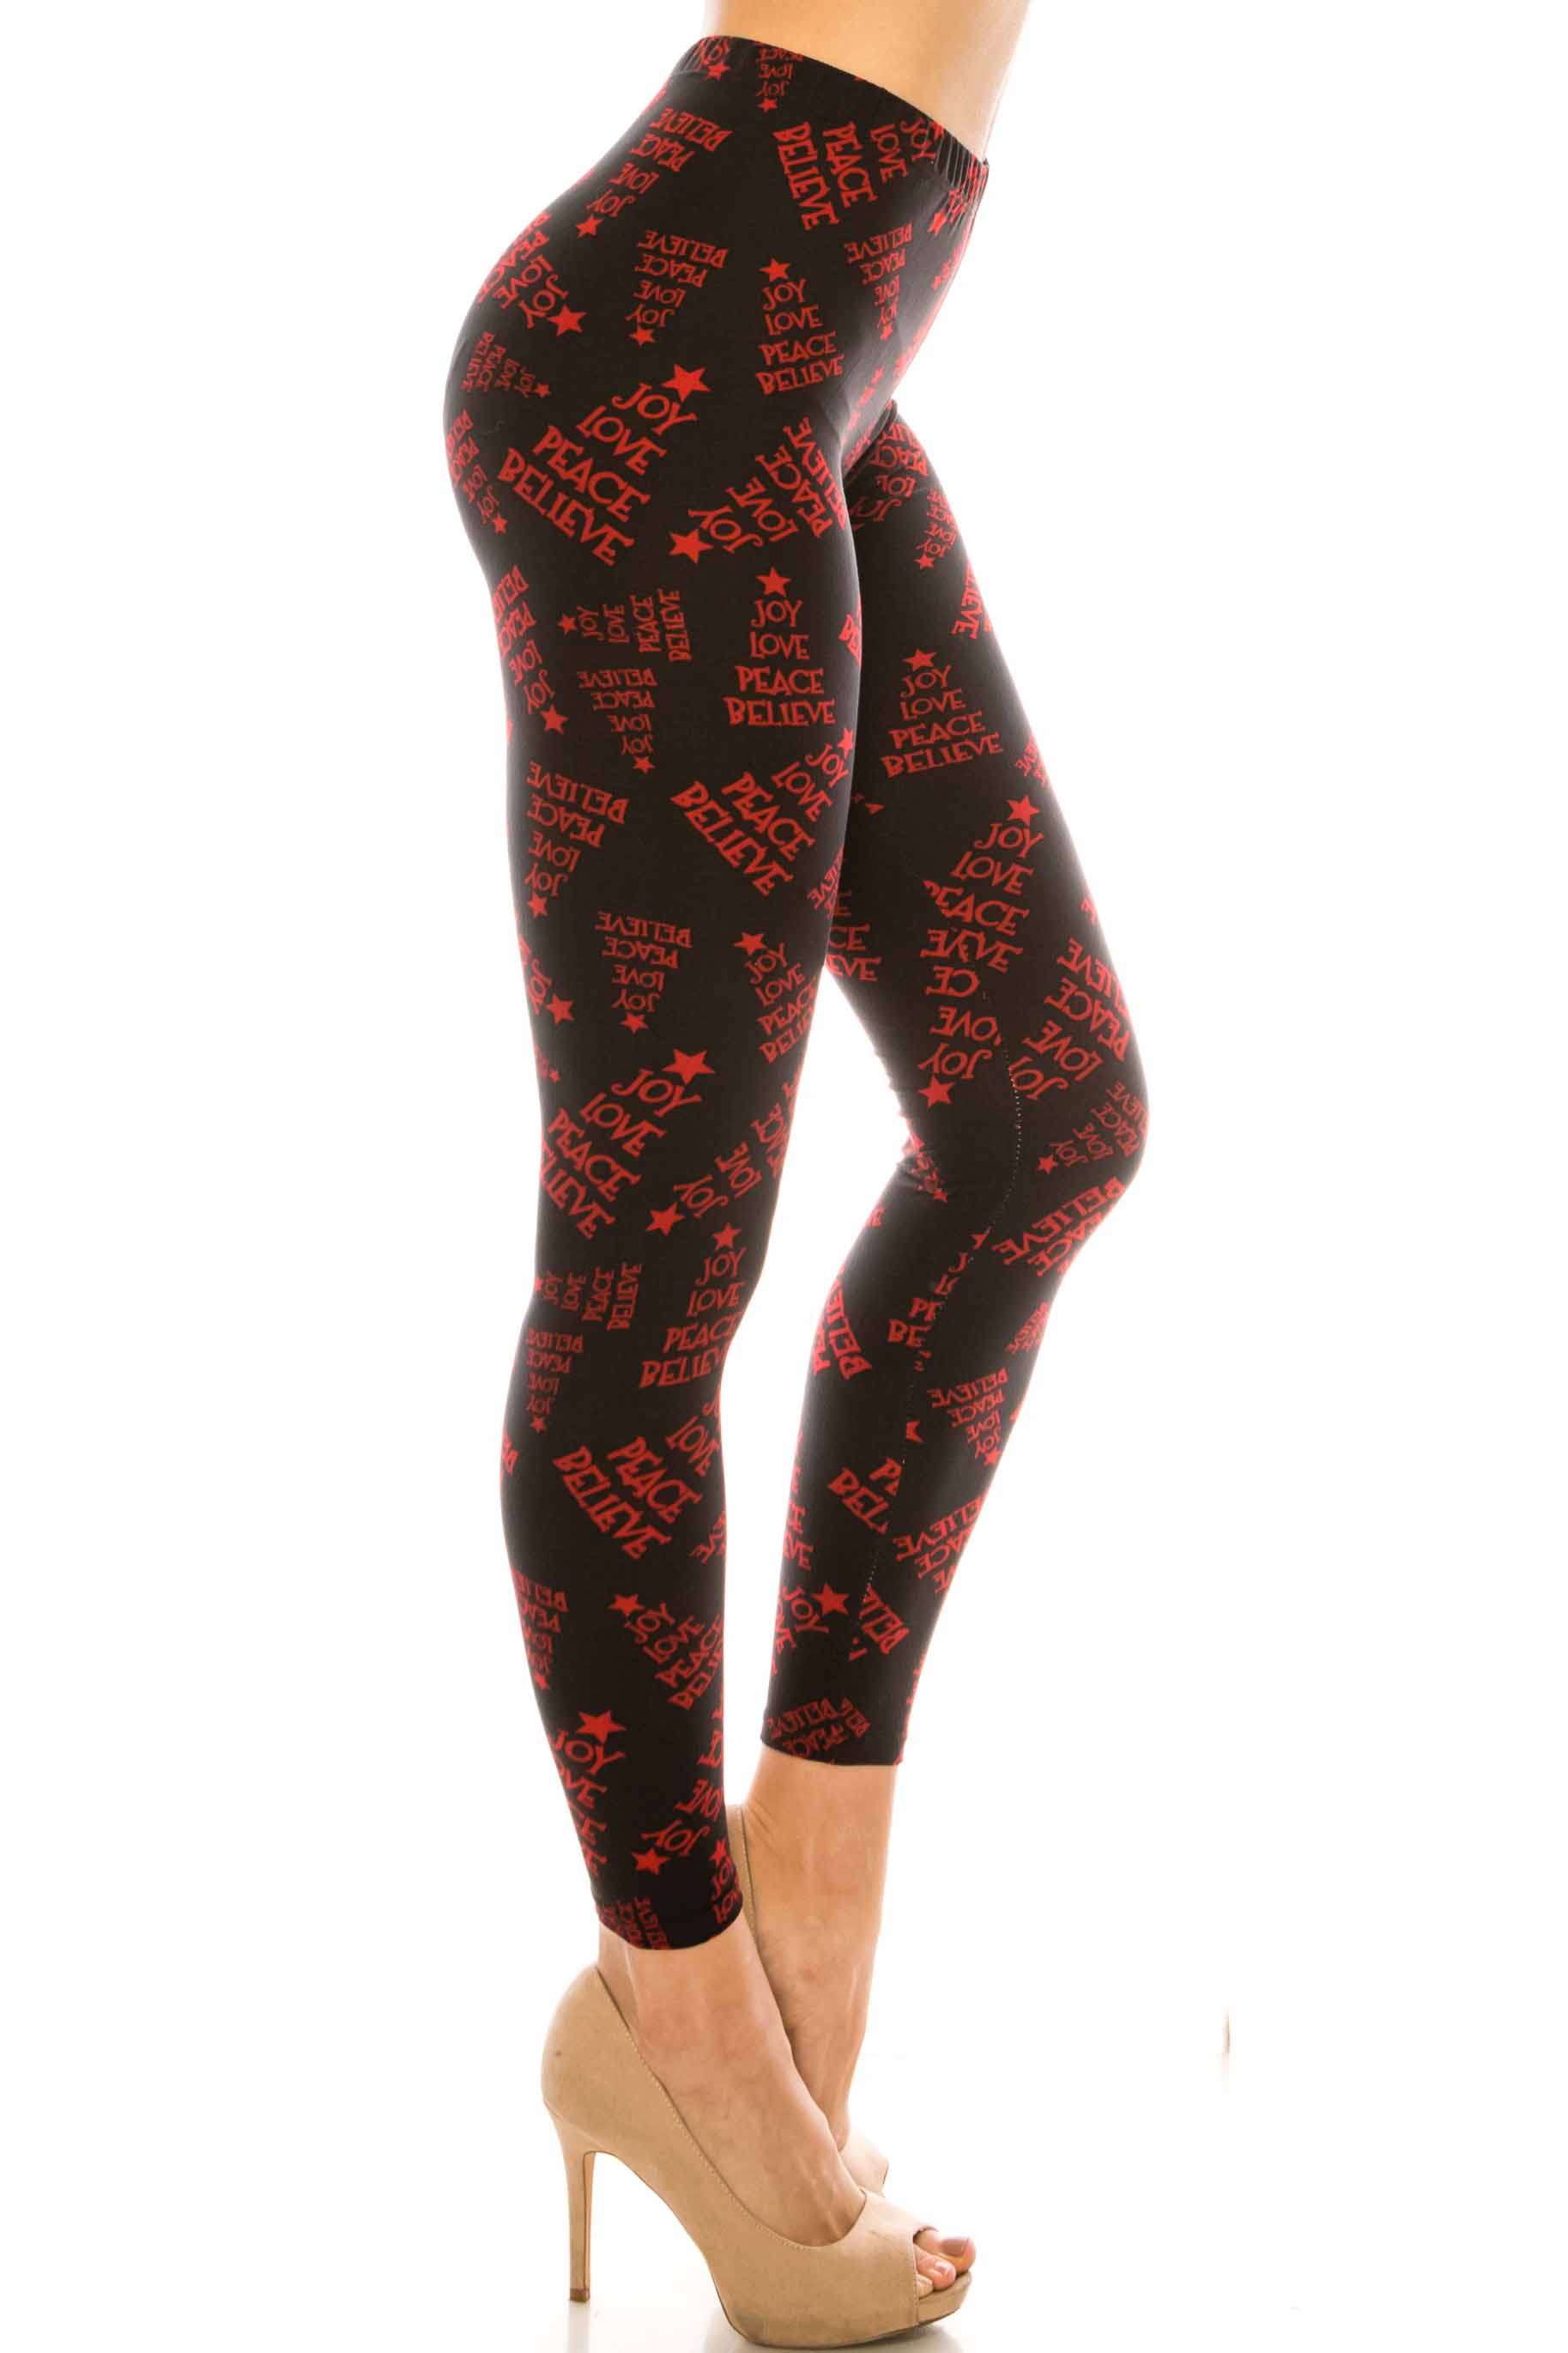 Wholesale Buttery Smooth Joy Love Peace Believe Holiday Leggings